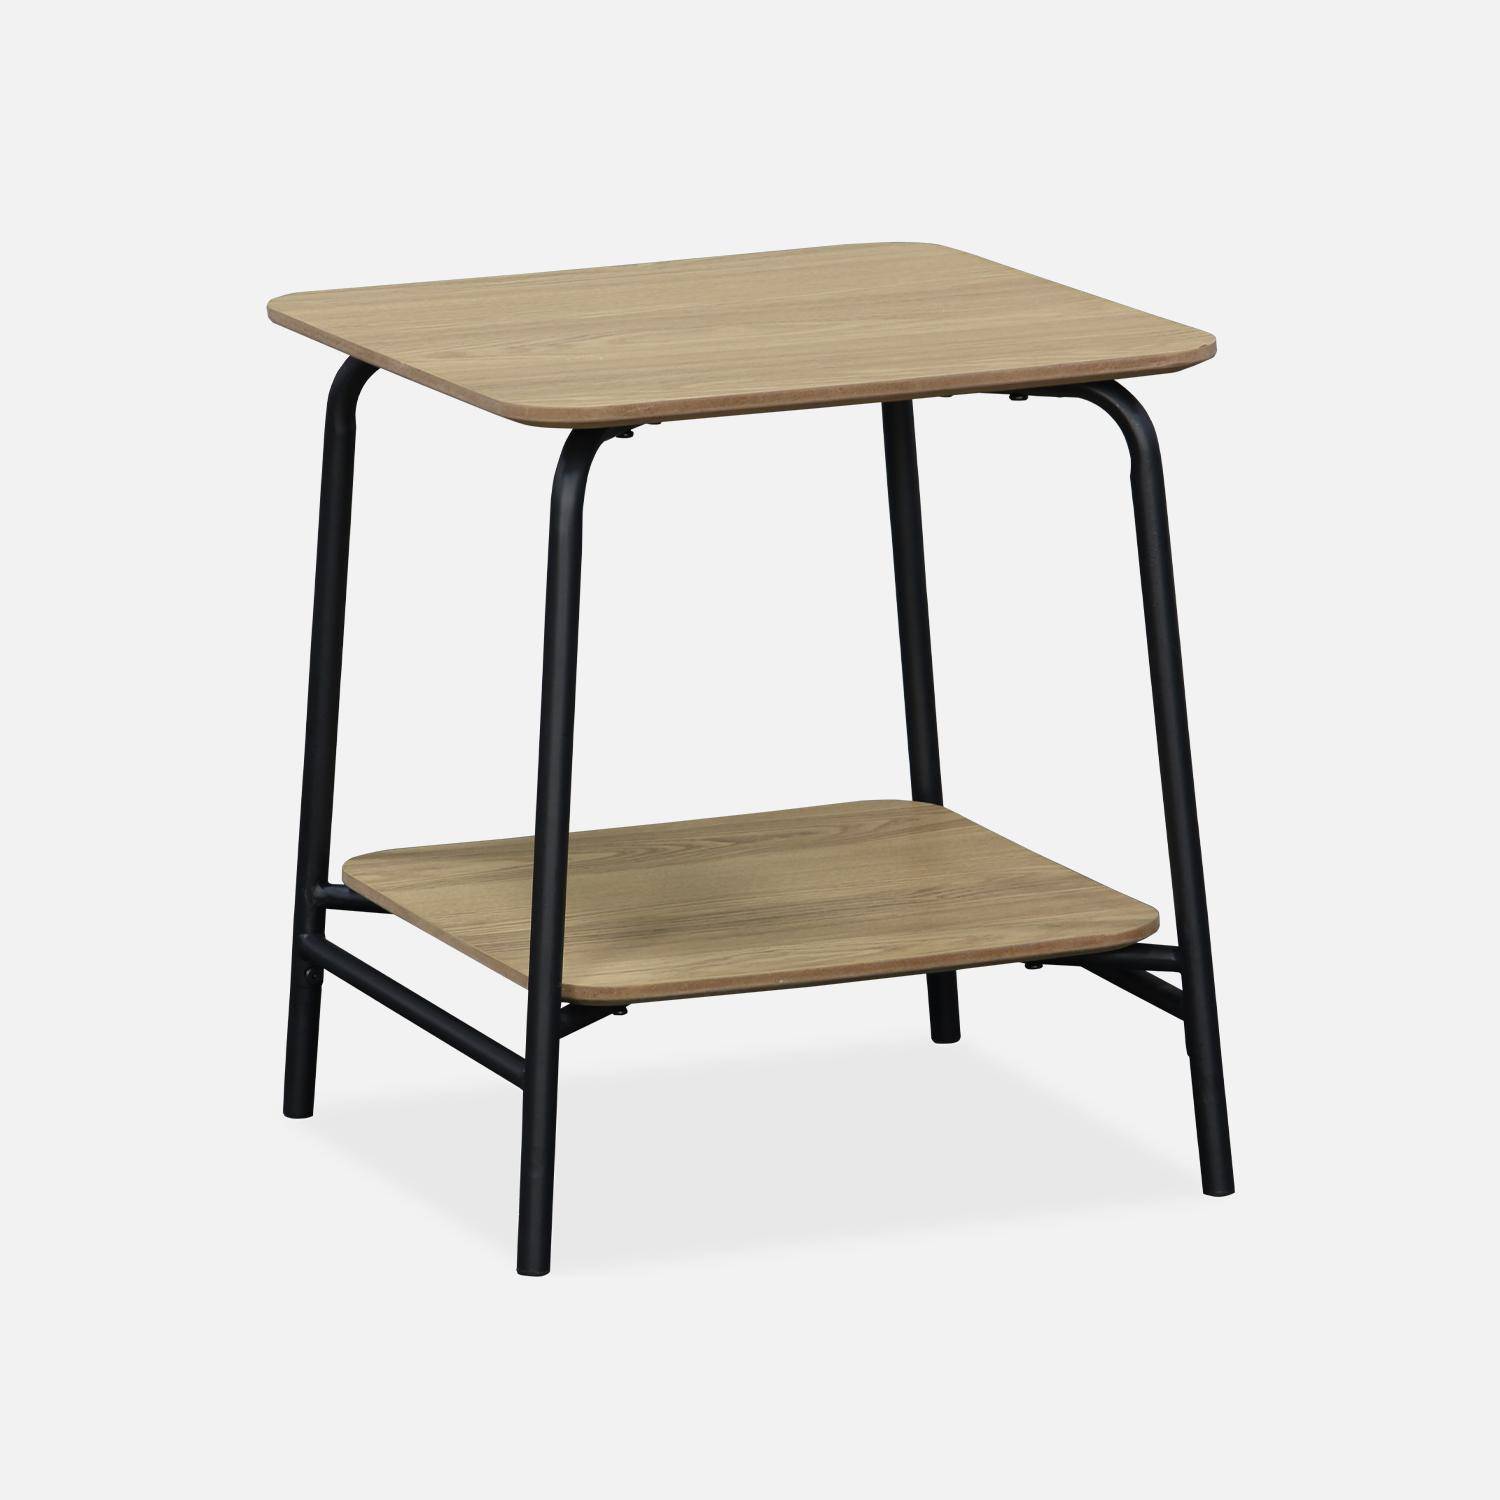 School table effect bedside table in wood decor with steel frame - 1 central shelf Photo4